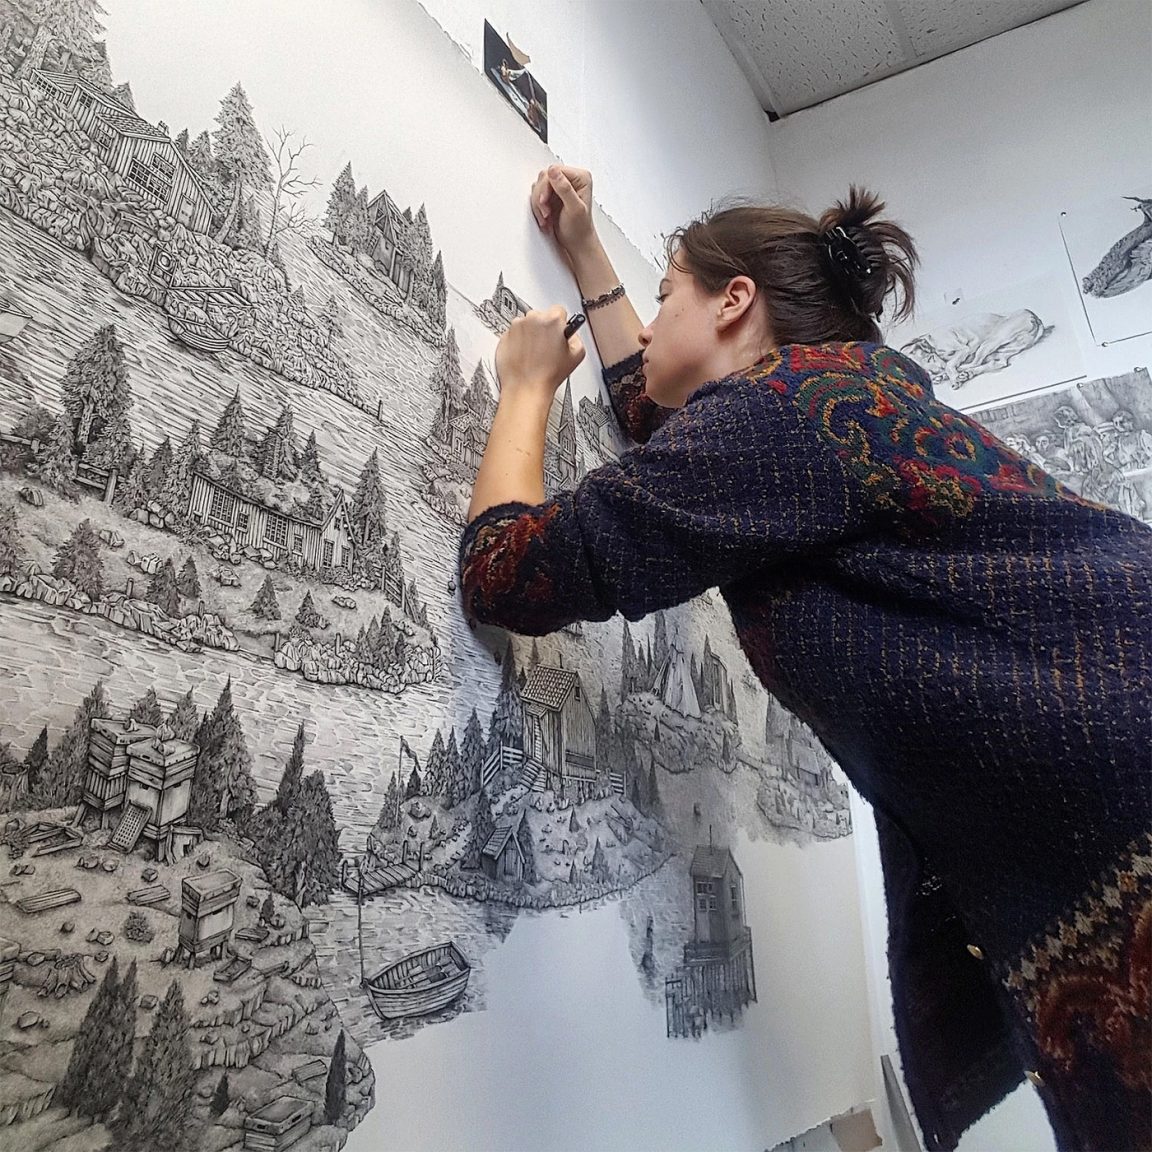 Artist Meticulously Creates Pen and Ink Drawings of Dreamy Landscapes